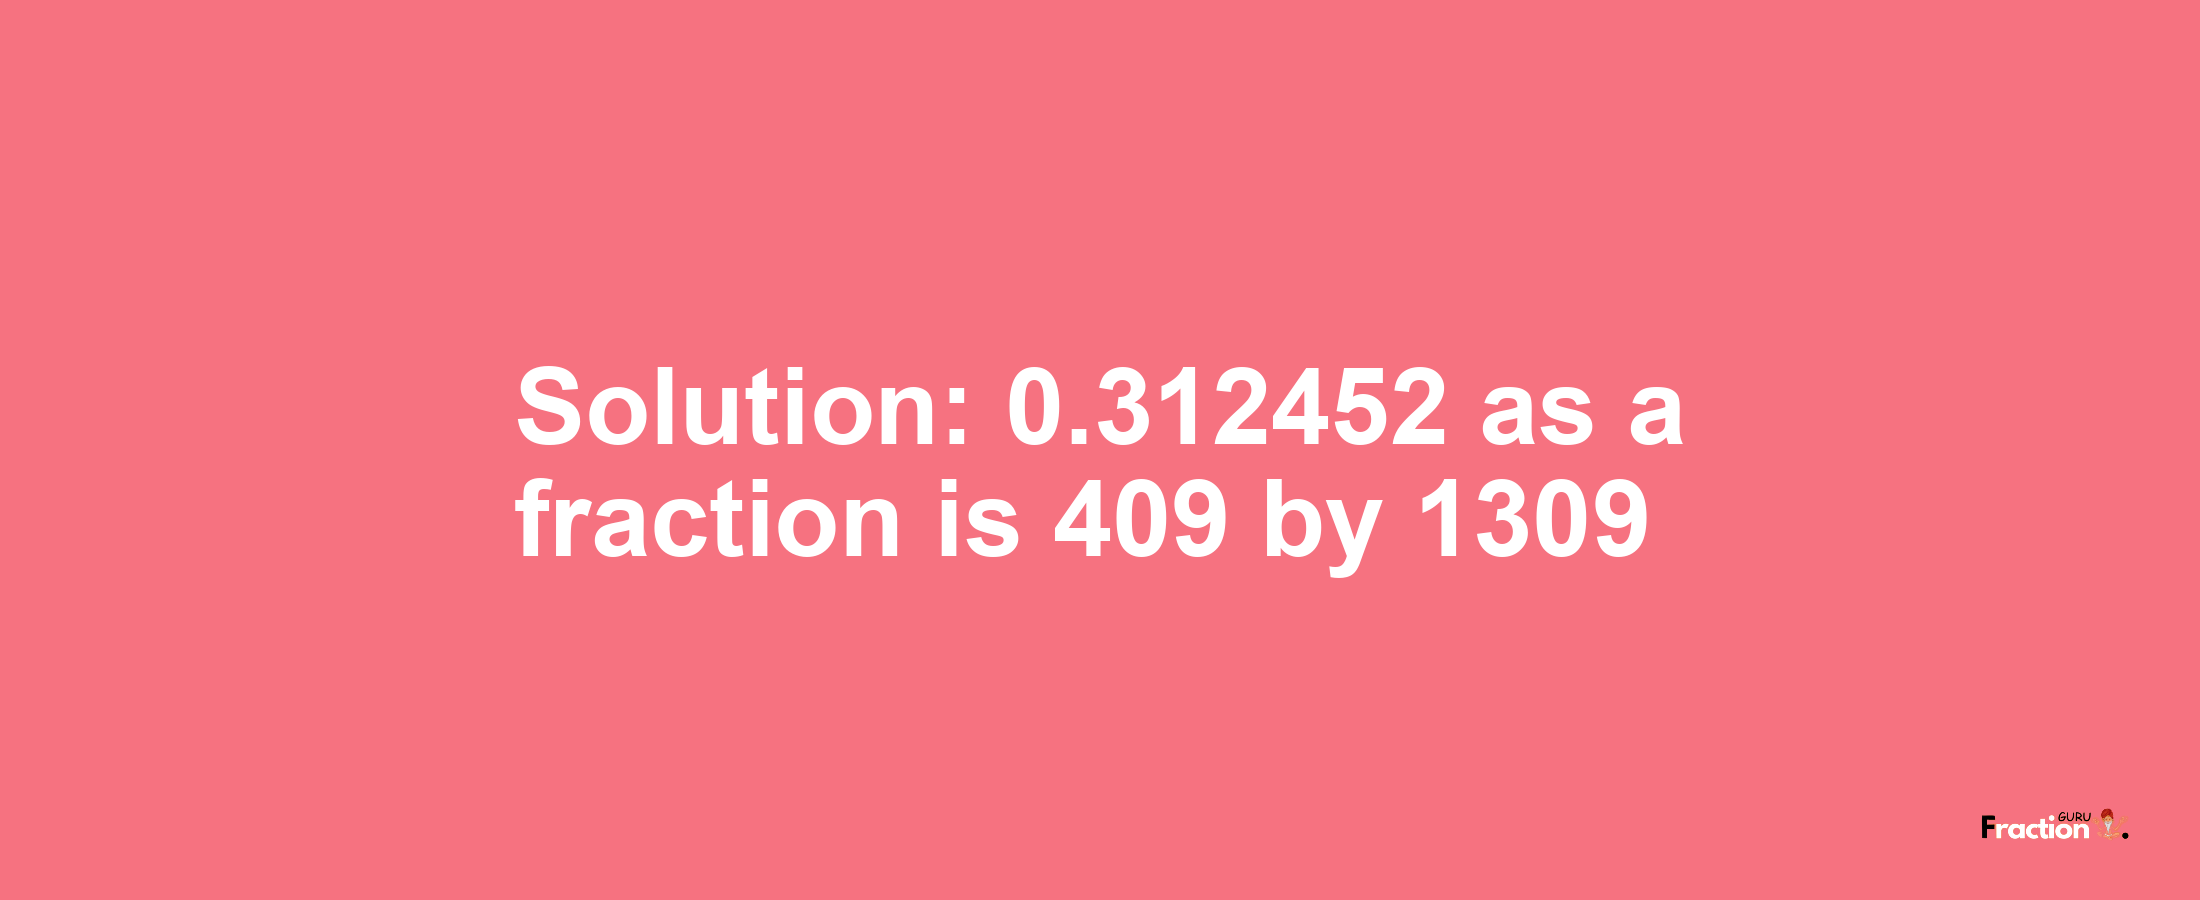 Solution:0.312452 as a fraction is 409/1309